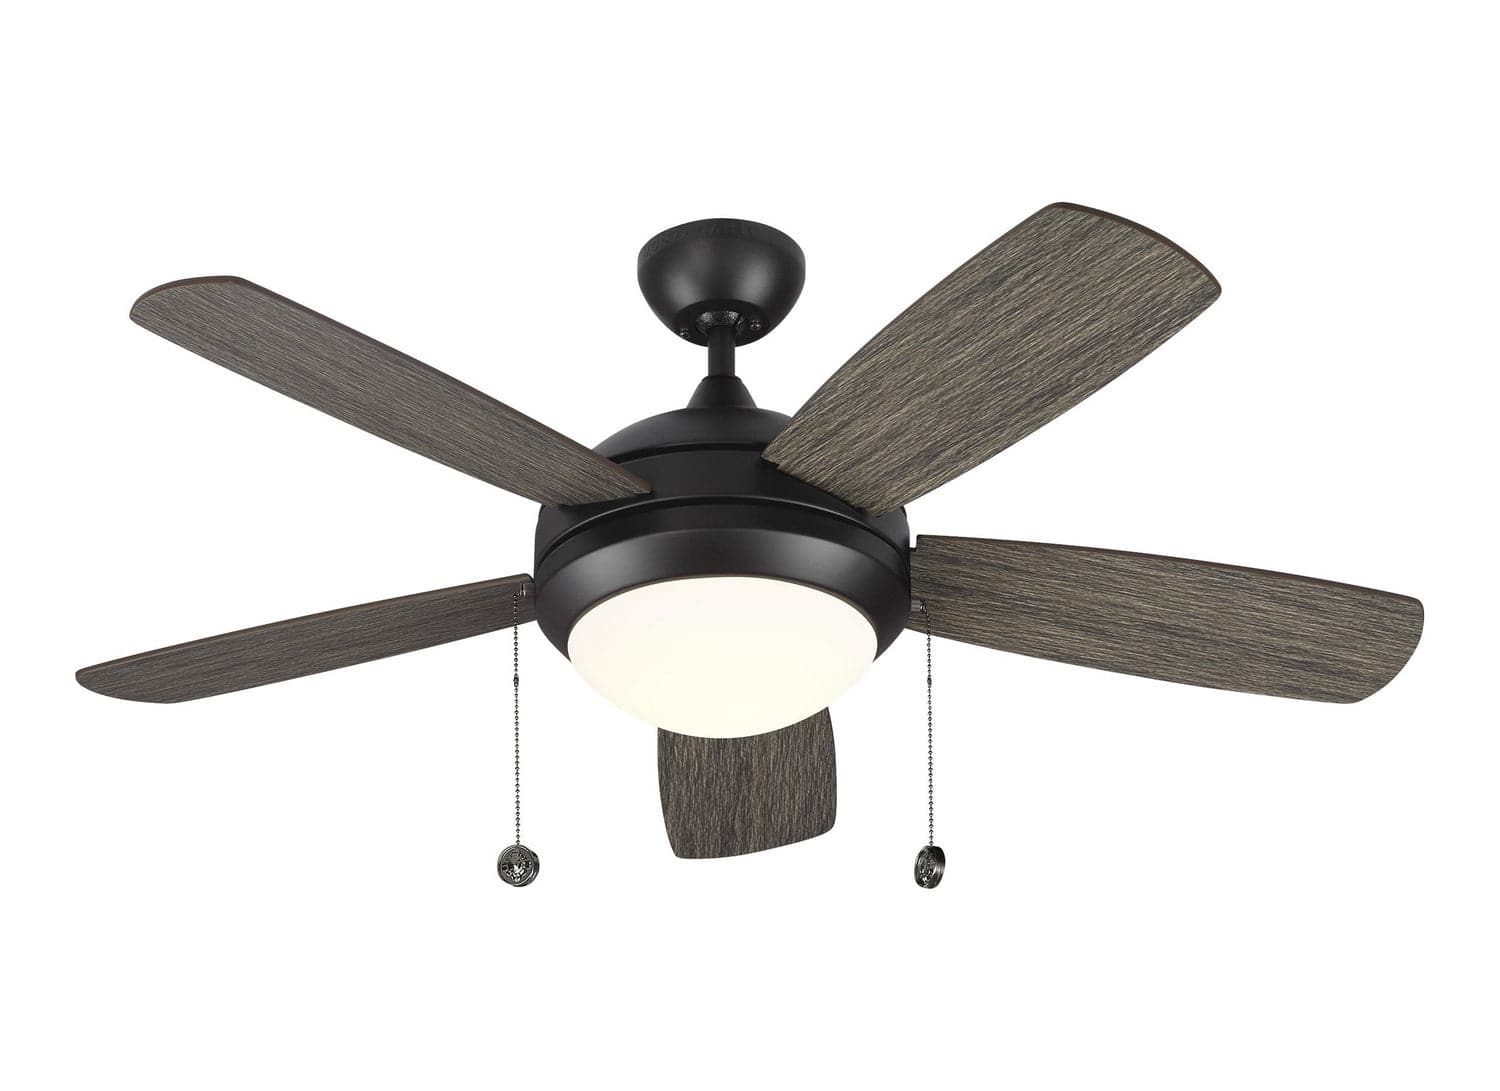 Generation Lighting. - 5DIC44AGPD-V1 - 44``Ceiling Fan - Discus Classic 44 - Aged Pewter